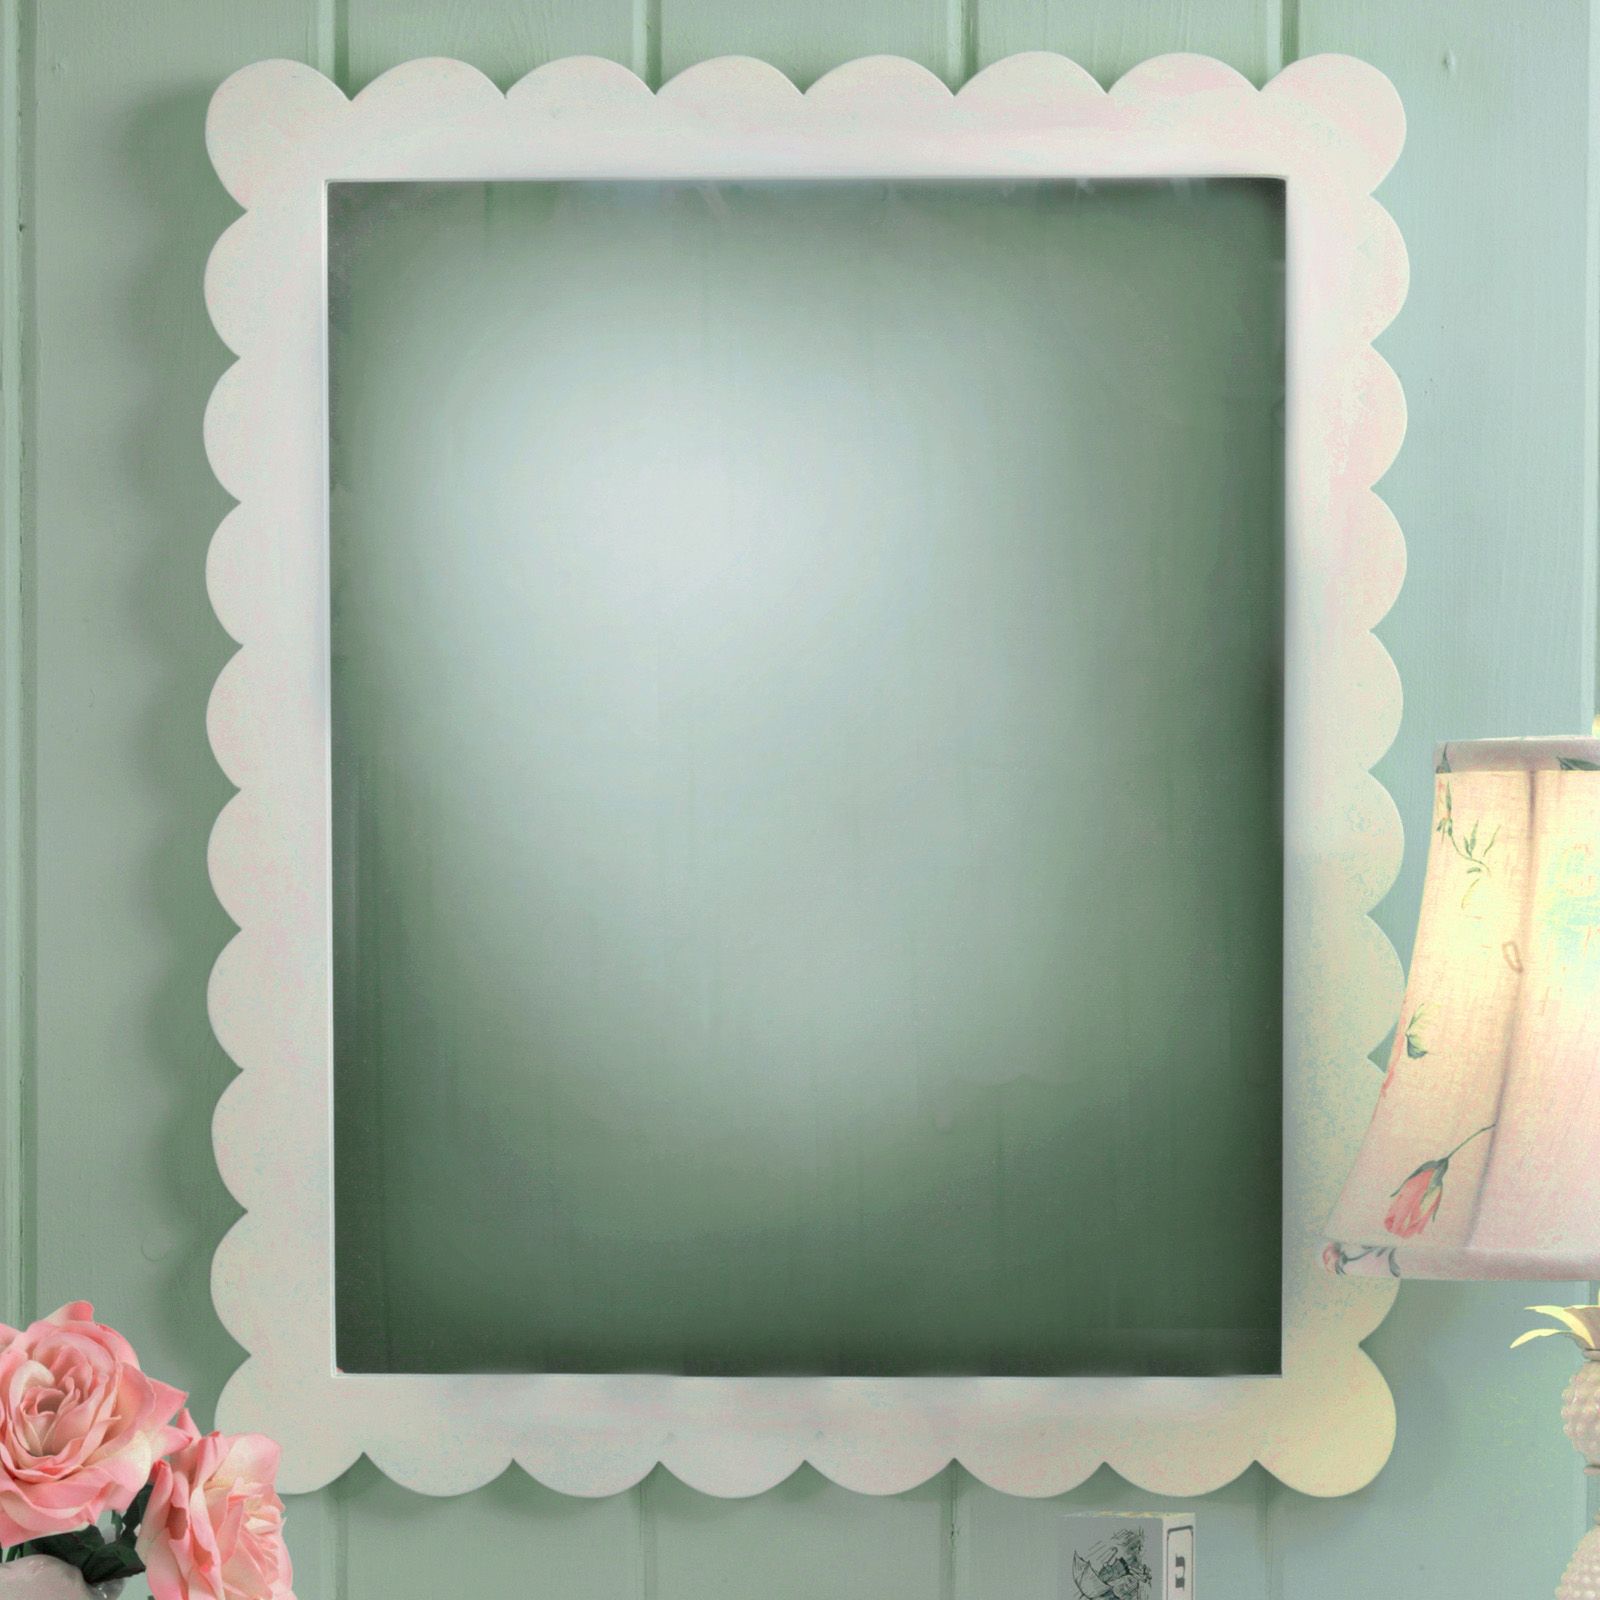 2021 New Arrivals White Scalloped Wall Mirror – Kids Mirrors At Hayneedle With Round Scalloped Wall Mirrors (View 14 of 15)